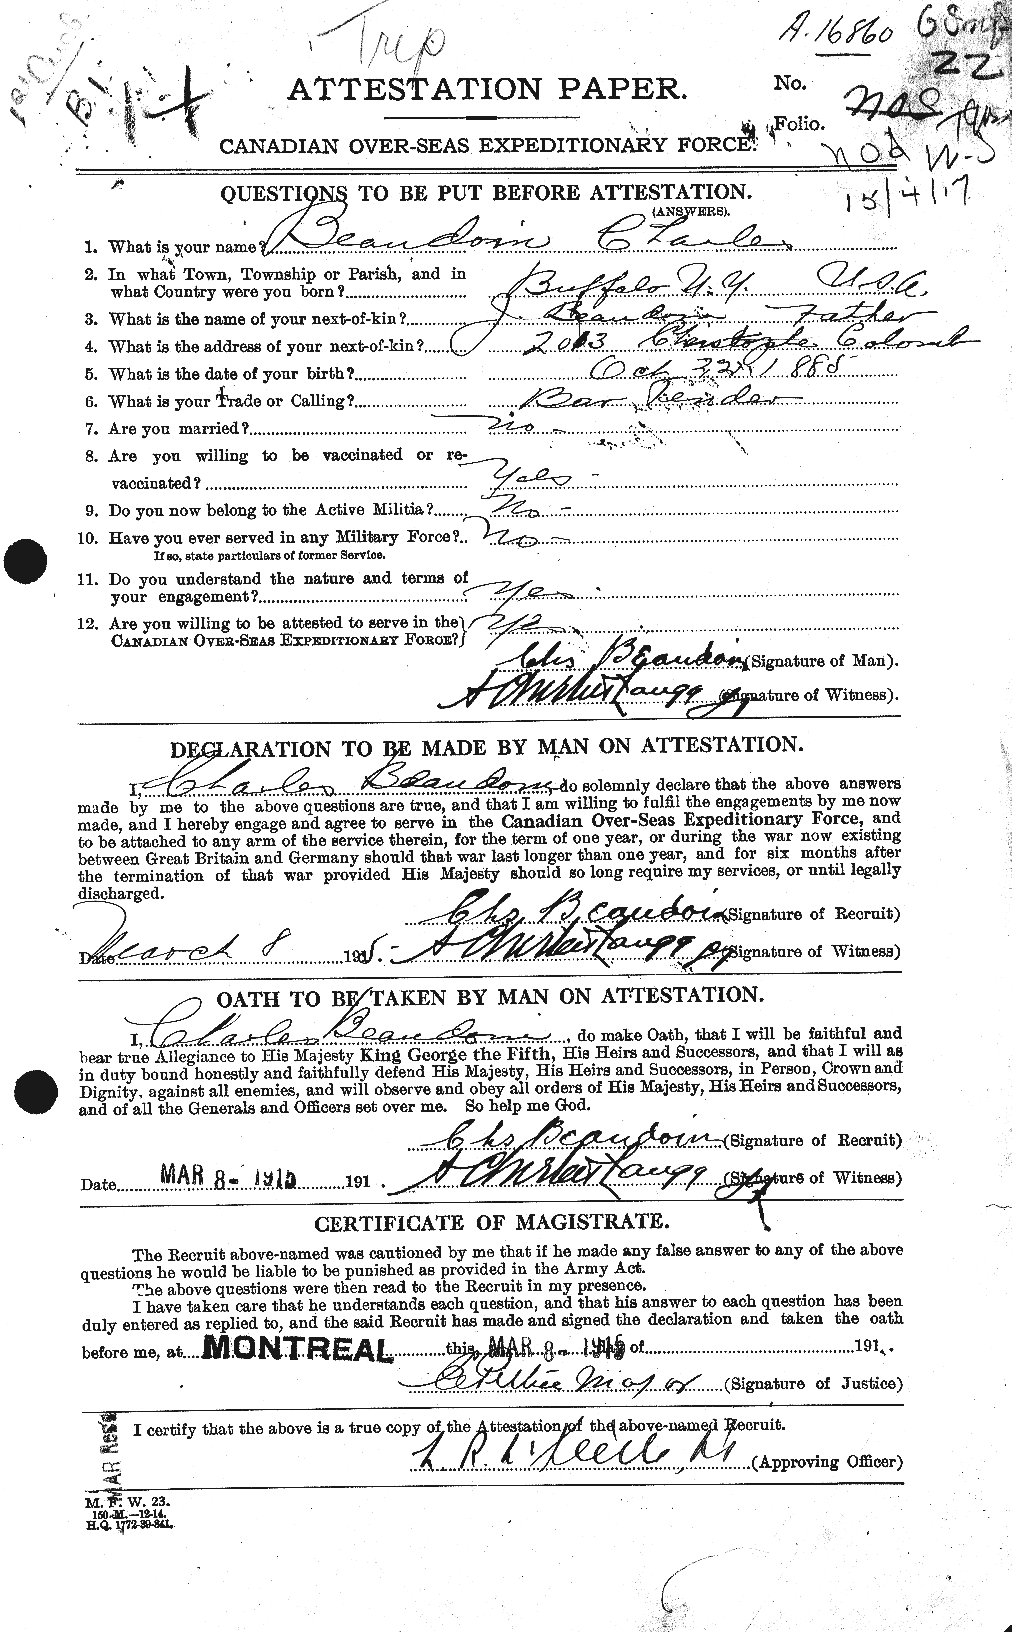 Personnel Records of the First World War - CEF 231218a